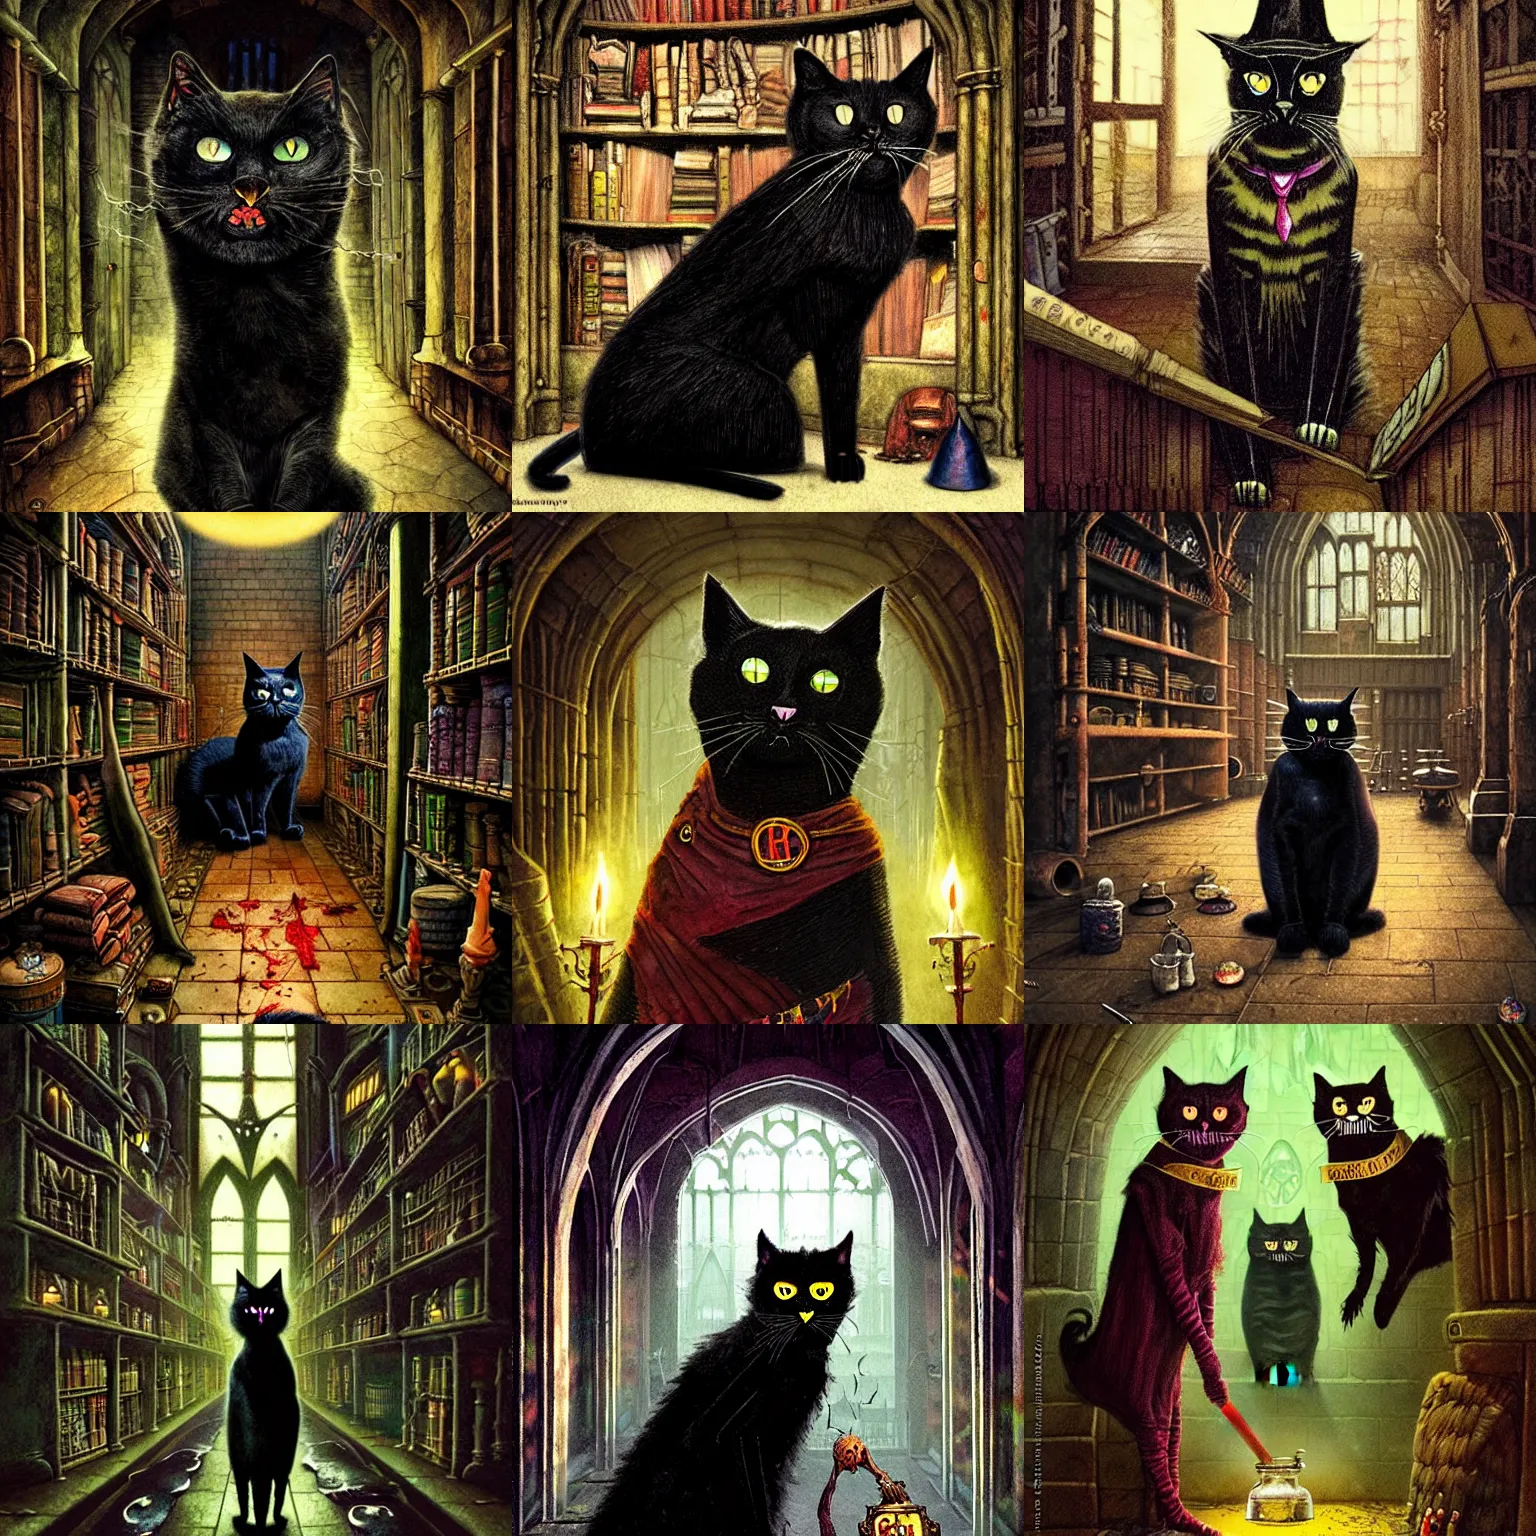 Prompt: Greebo, the scarred, bruised, angry, black cat, at a corridor of Hogwarts School of Witchcraft and Wizardry, detailed, hyperrealistic, colorful, cinematic lighting, digital art by Paul Kidby and Jim Kay